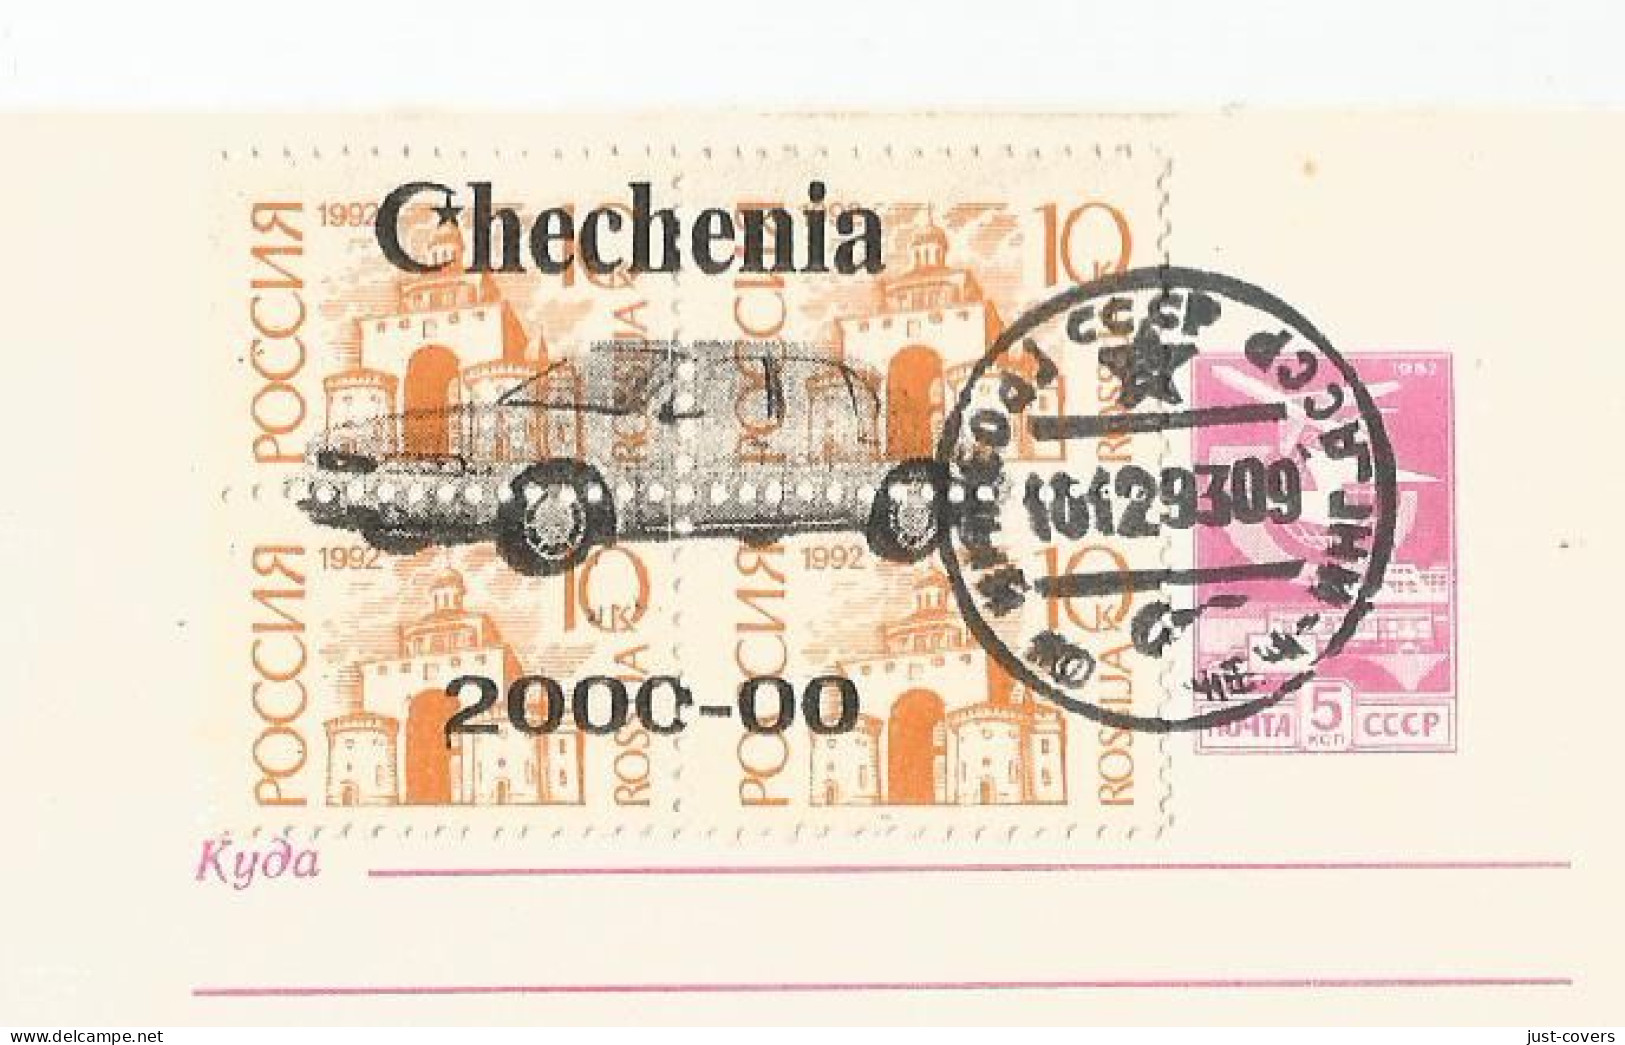 Russia Chechnya:Uprated Russian Postal Stationary With Chechenya Overprint.........................(Box10) - Covers & Documents